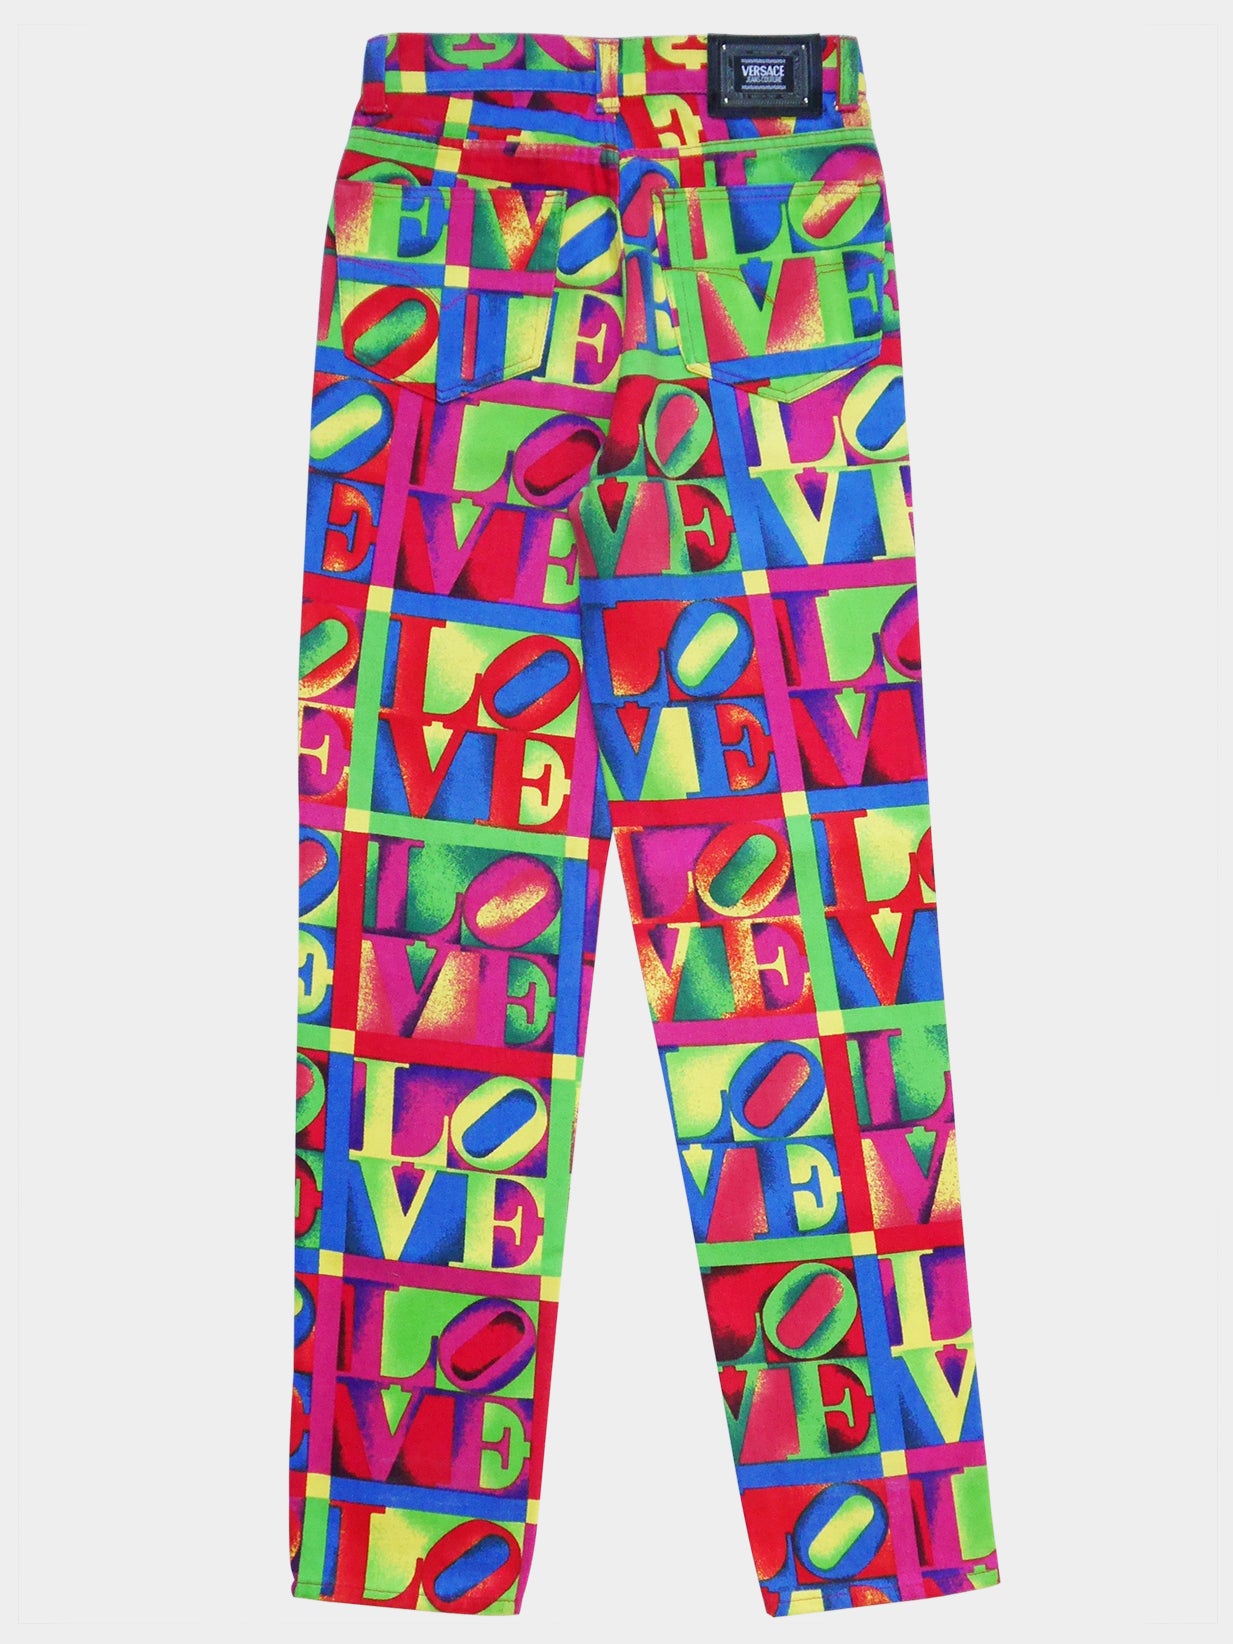 VERSACE Jeans Couture Spring 1995 Vintage Robert Indiana LOVE